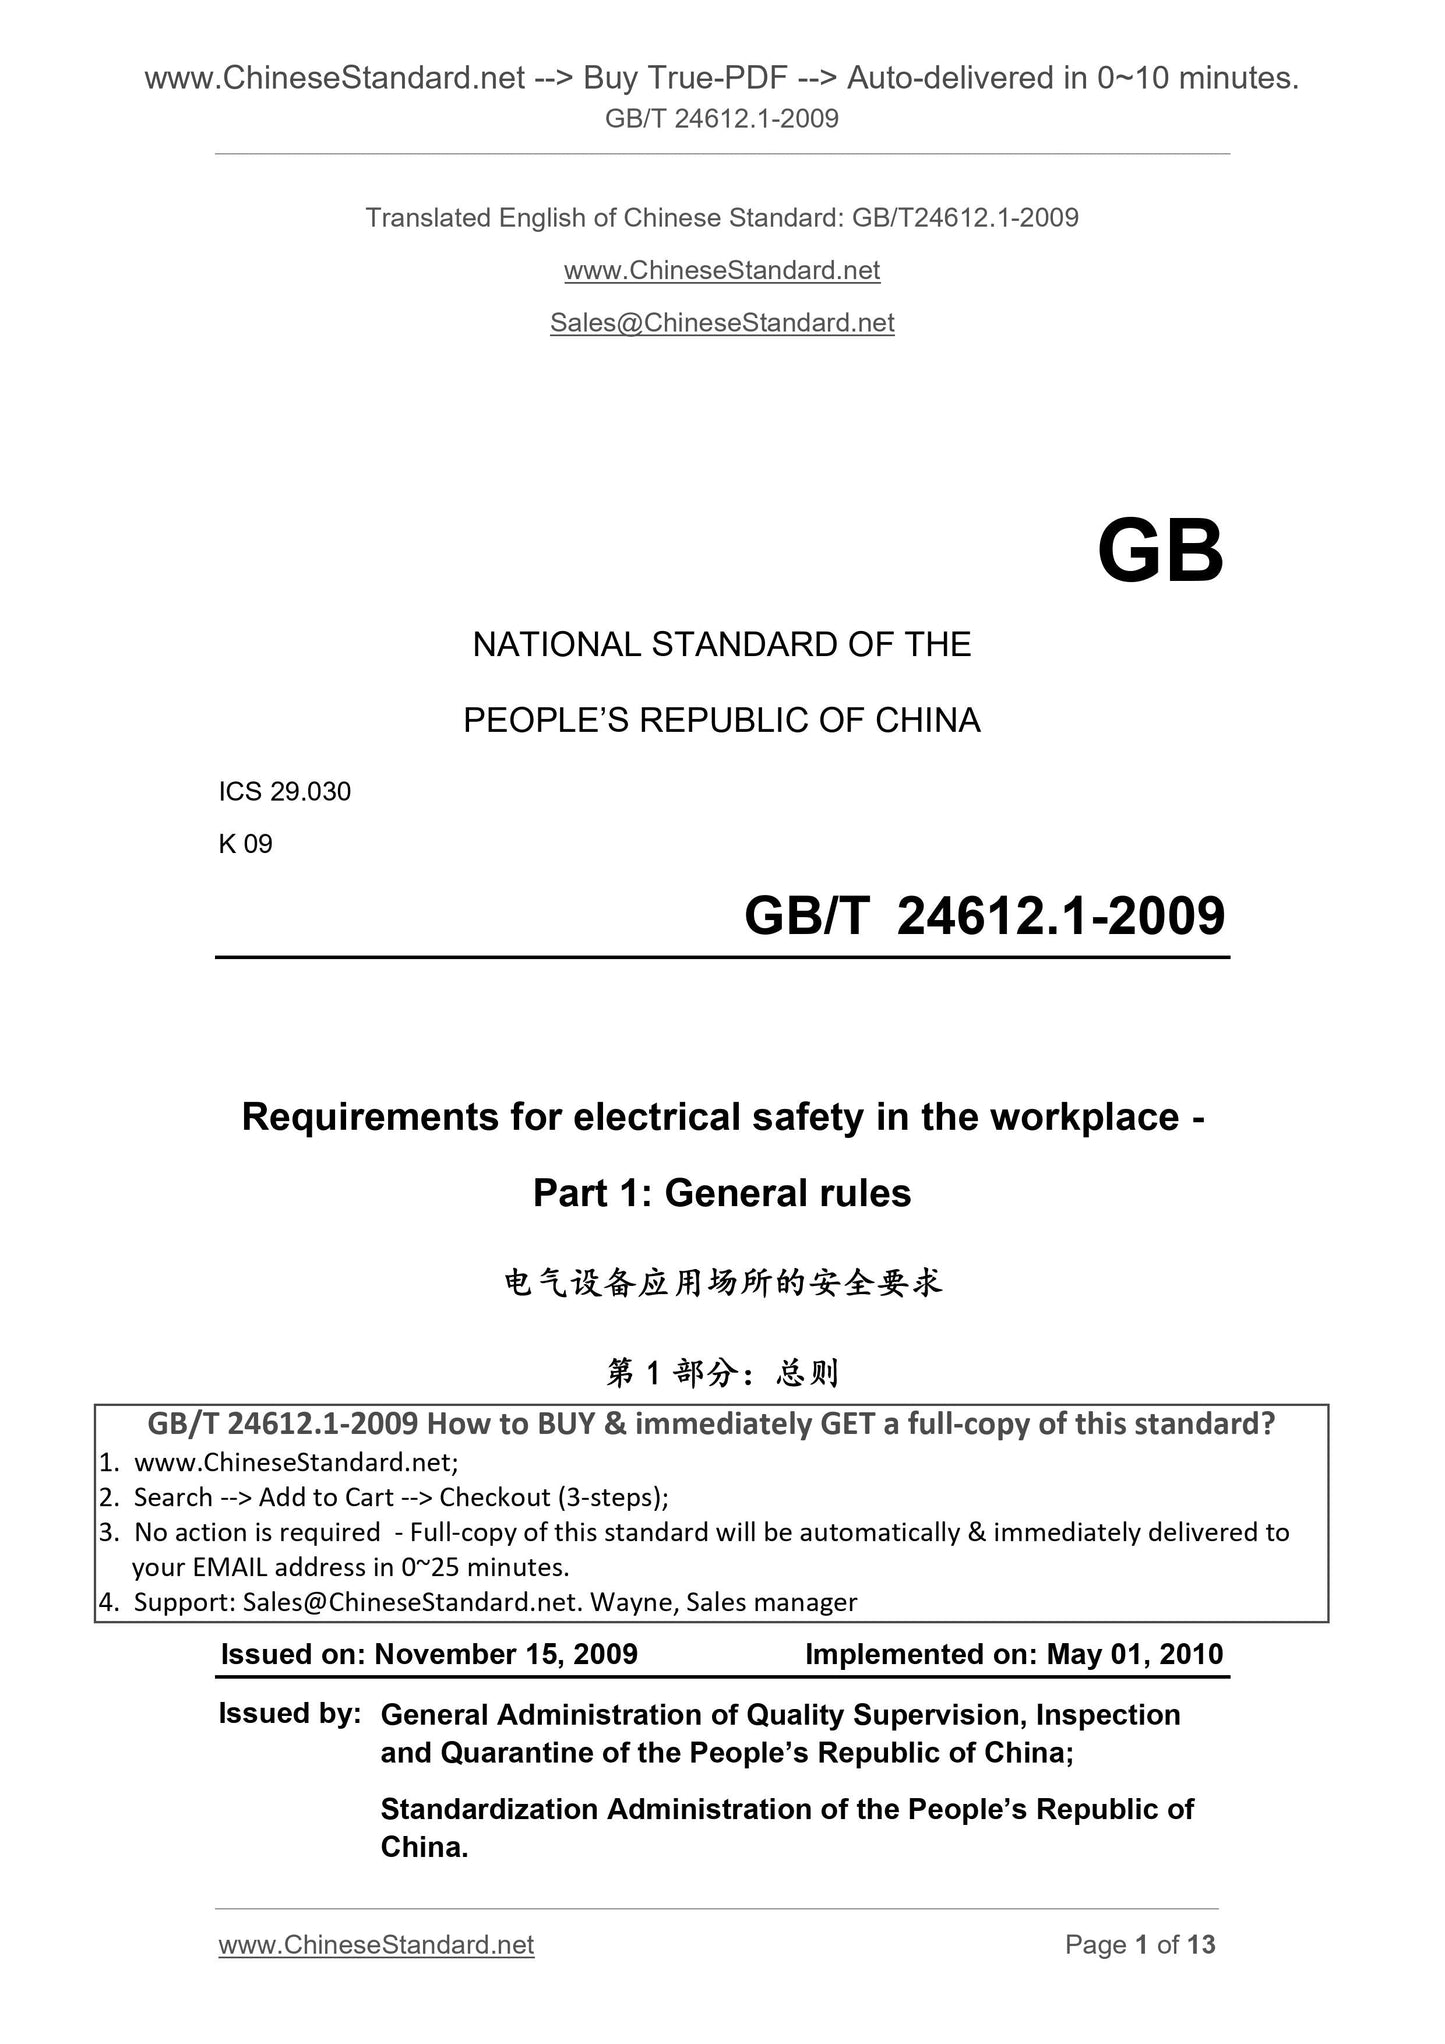 GB/T 24612.1-2009 Page 1